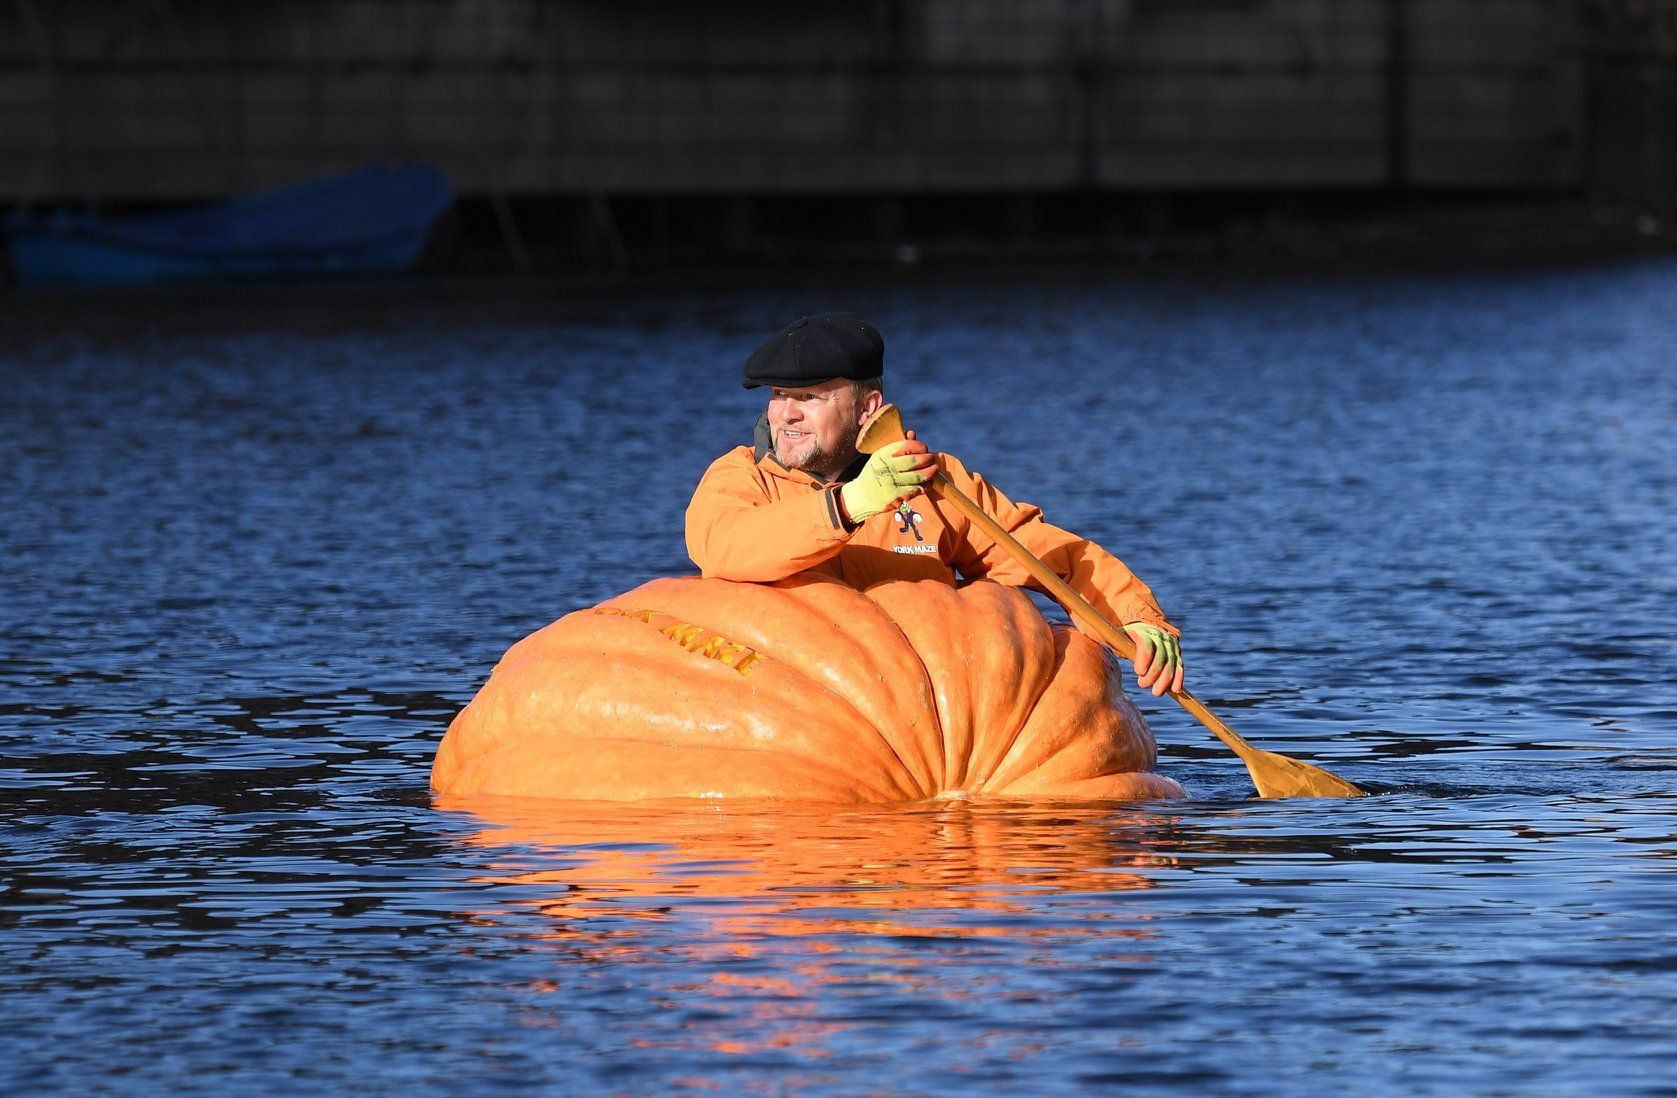 Largest pumpkin boat world record: Tom Pearcy